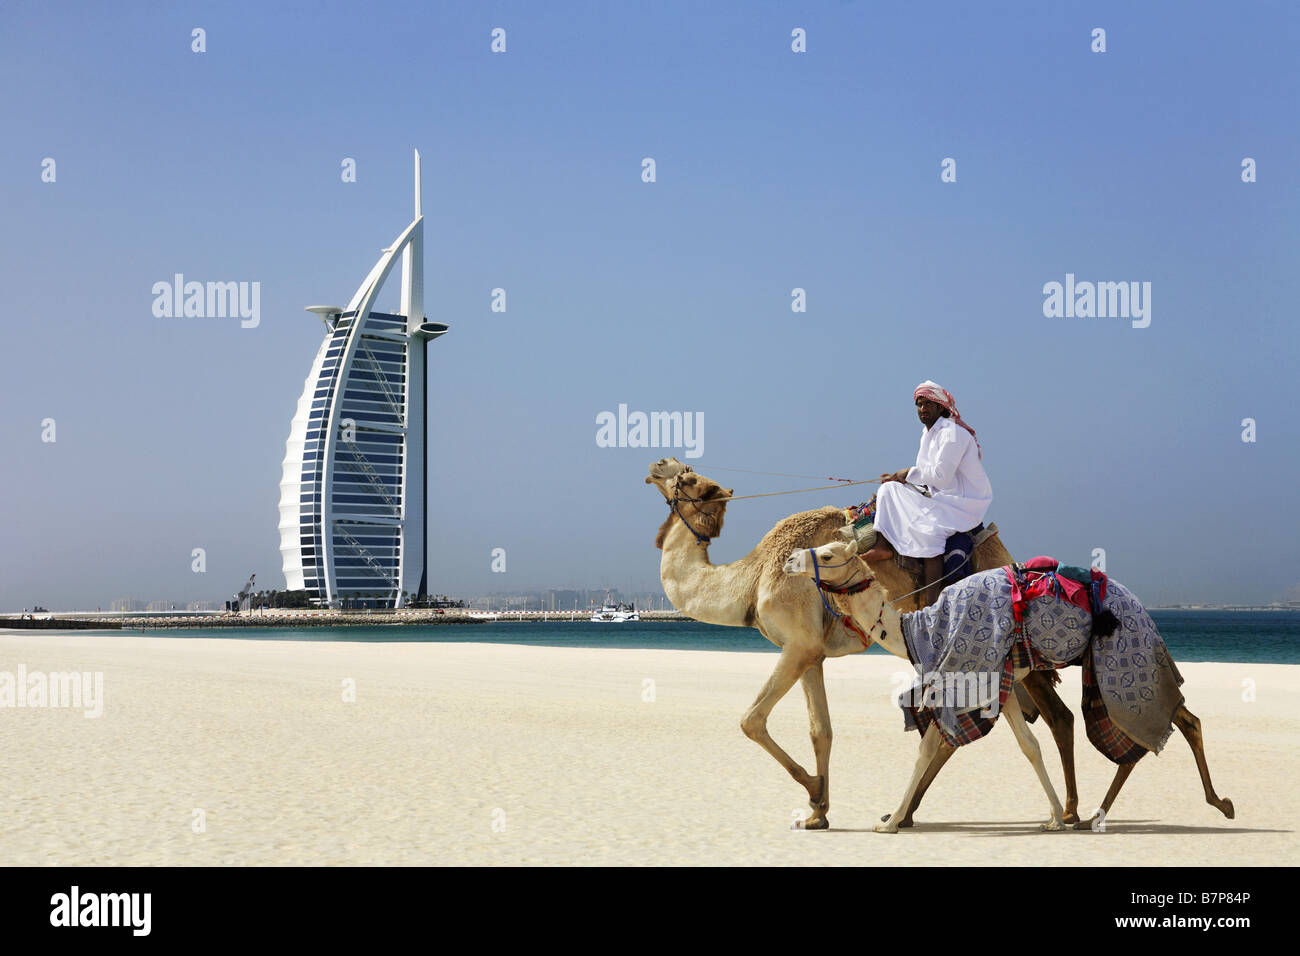 Camels walking on beach with the Burj al Arab hotel in background, Dubai Stock Photo